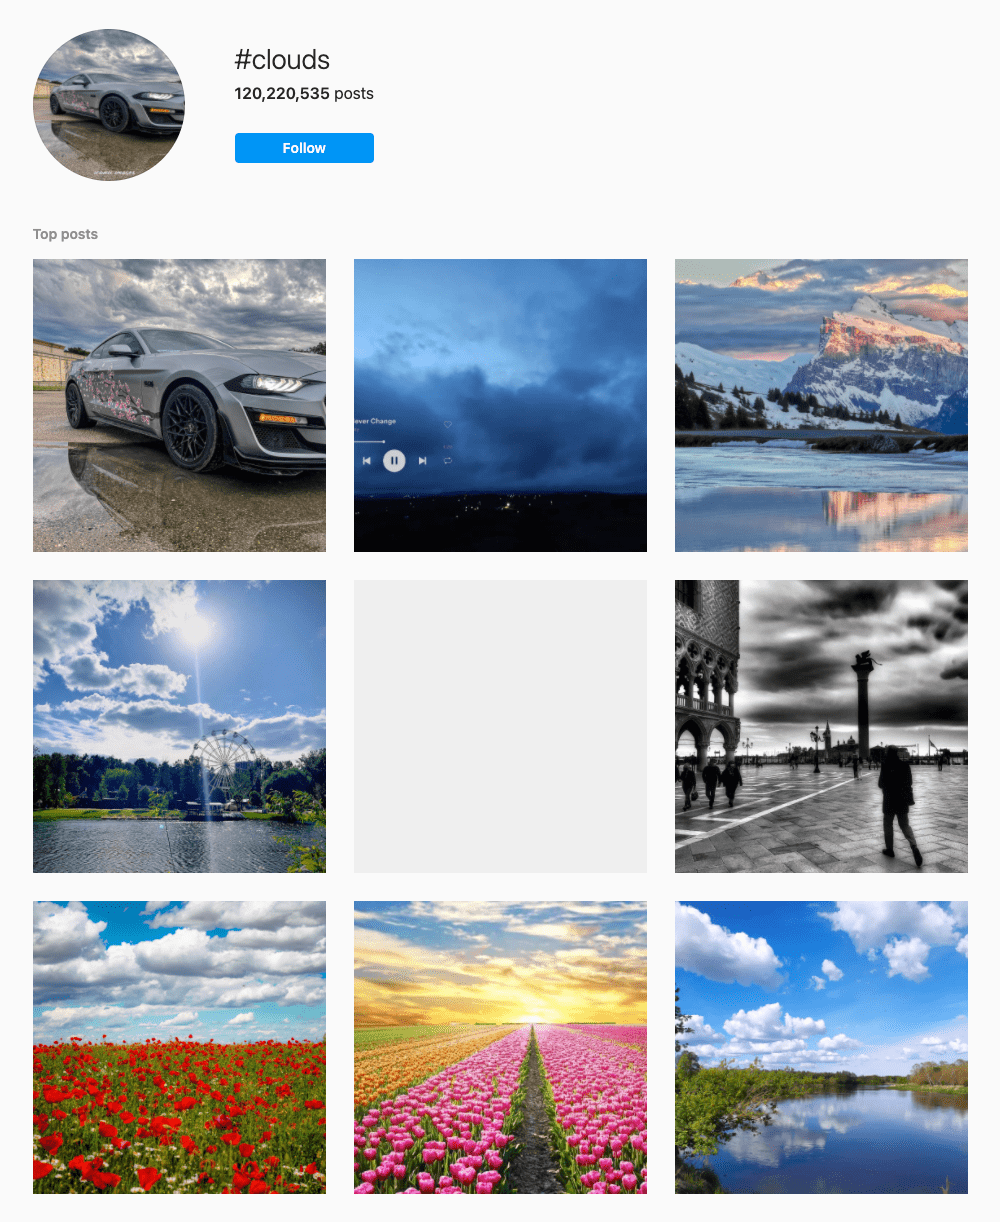 #clouds Hashtags for Instagram